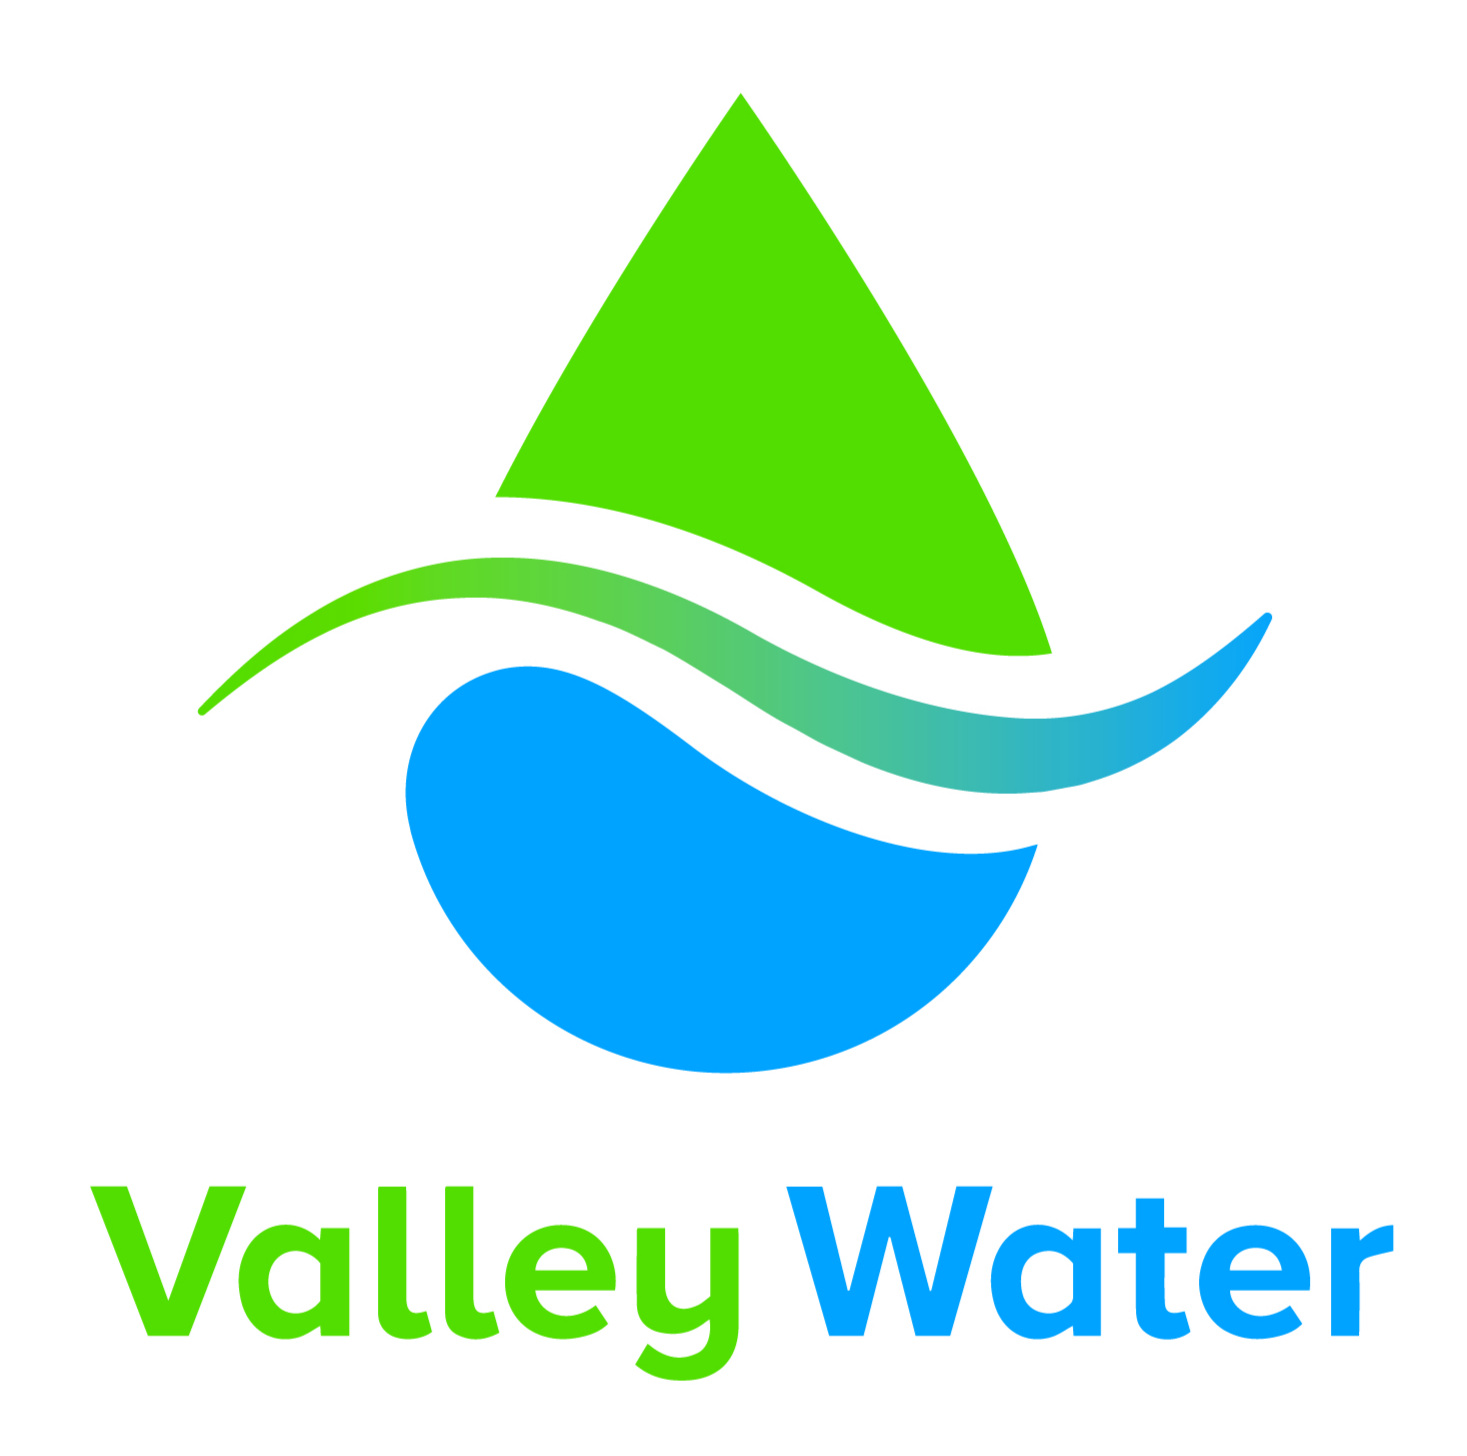 05. ValleyWater_Stacked Logo_Colored.jpg